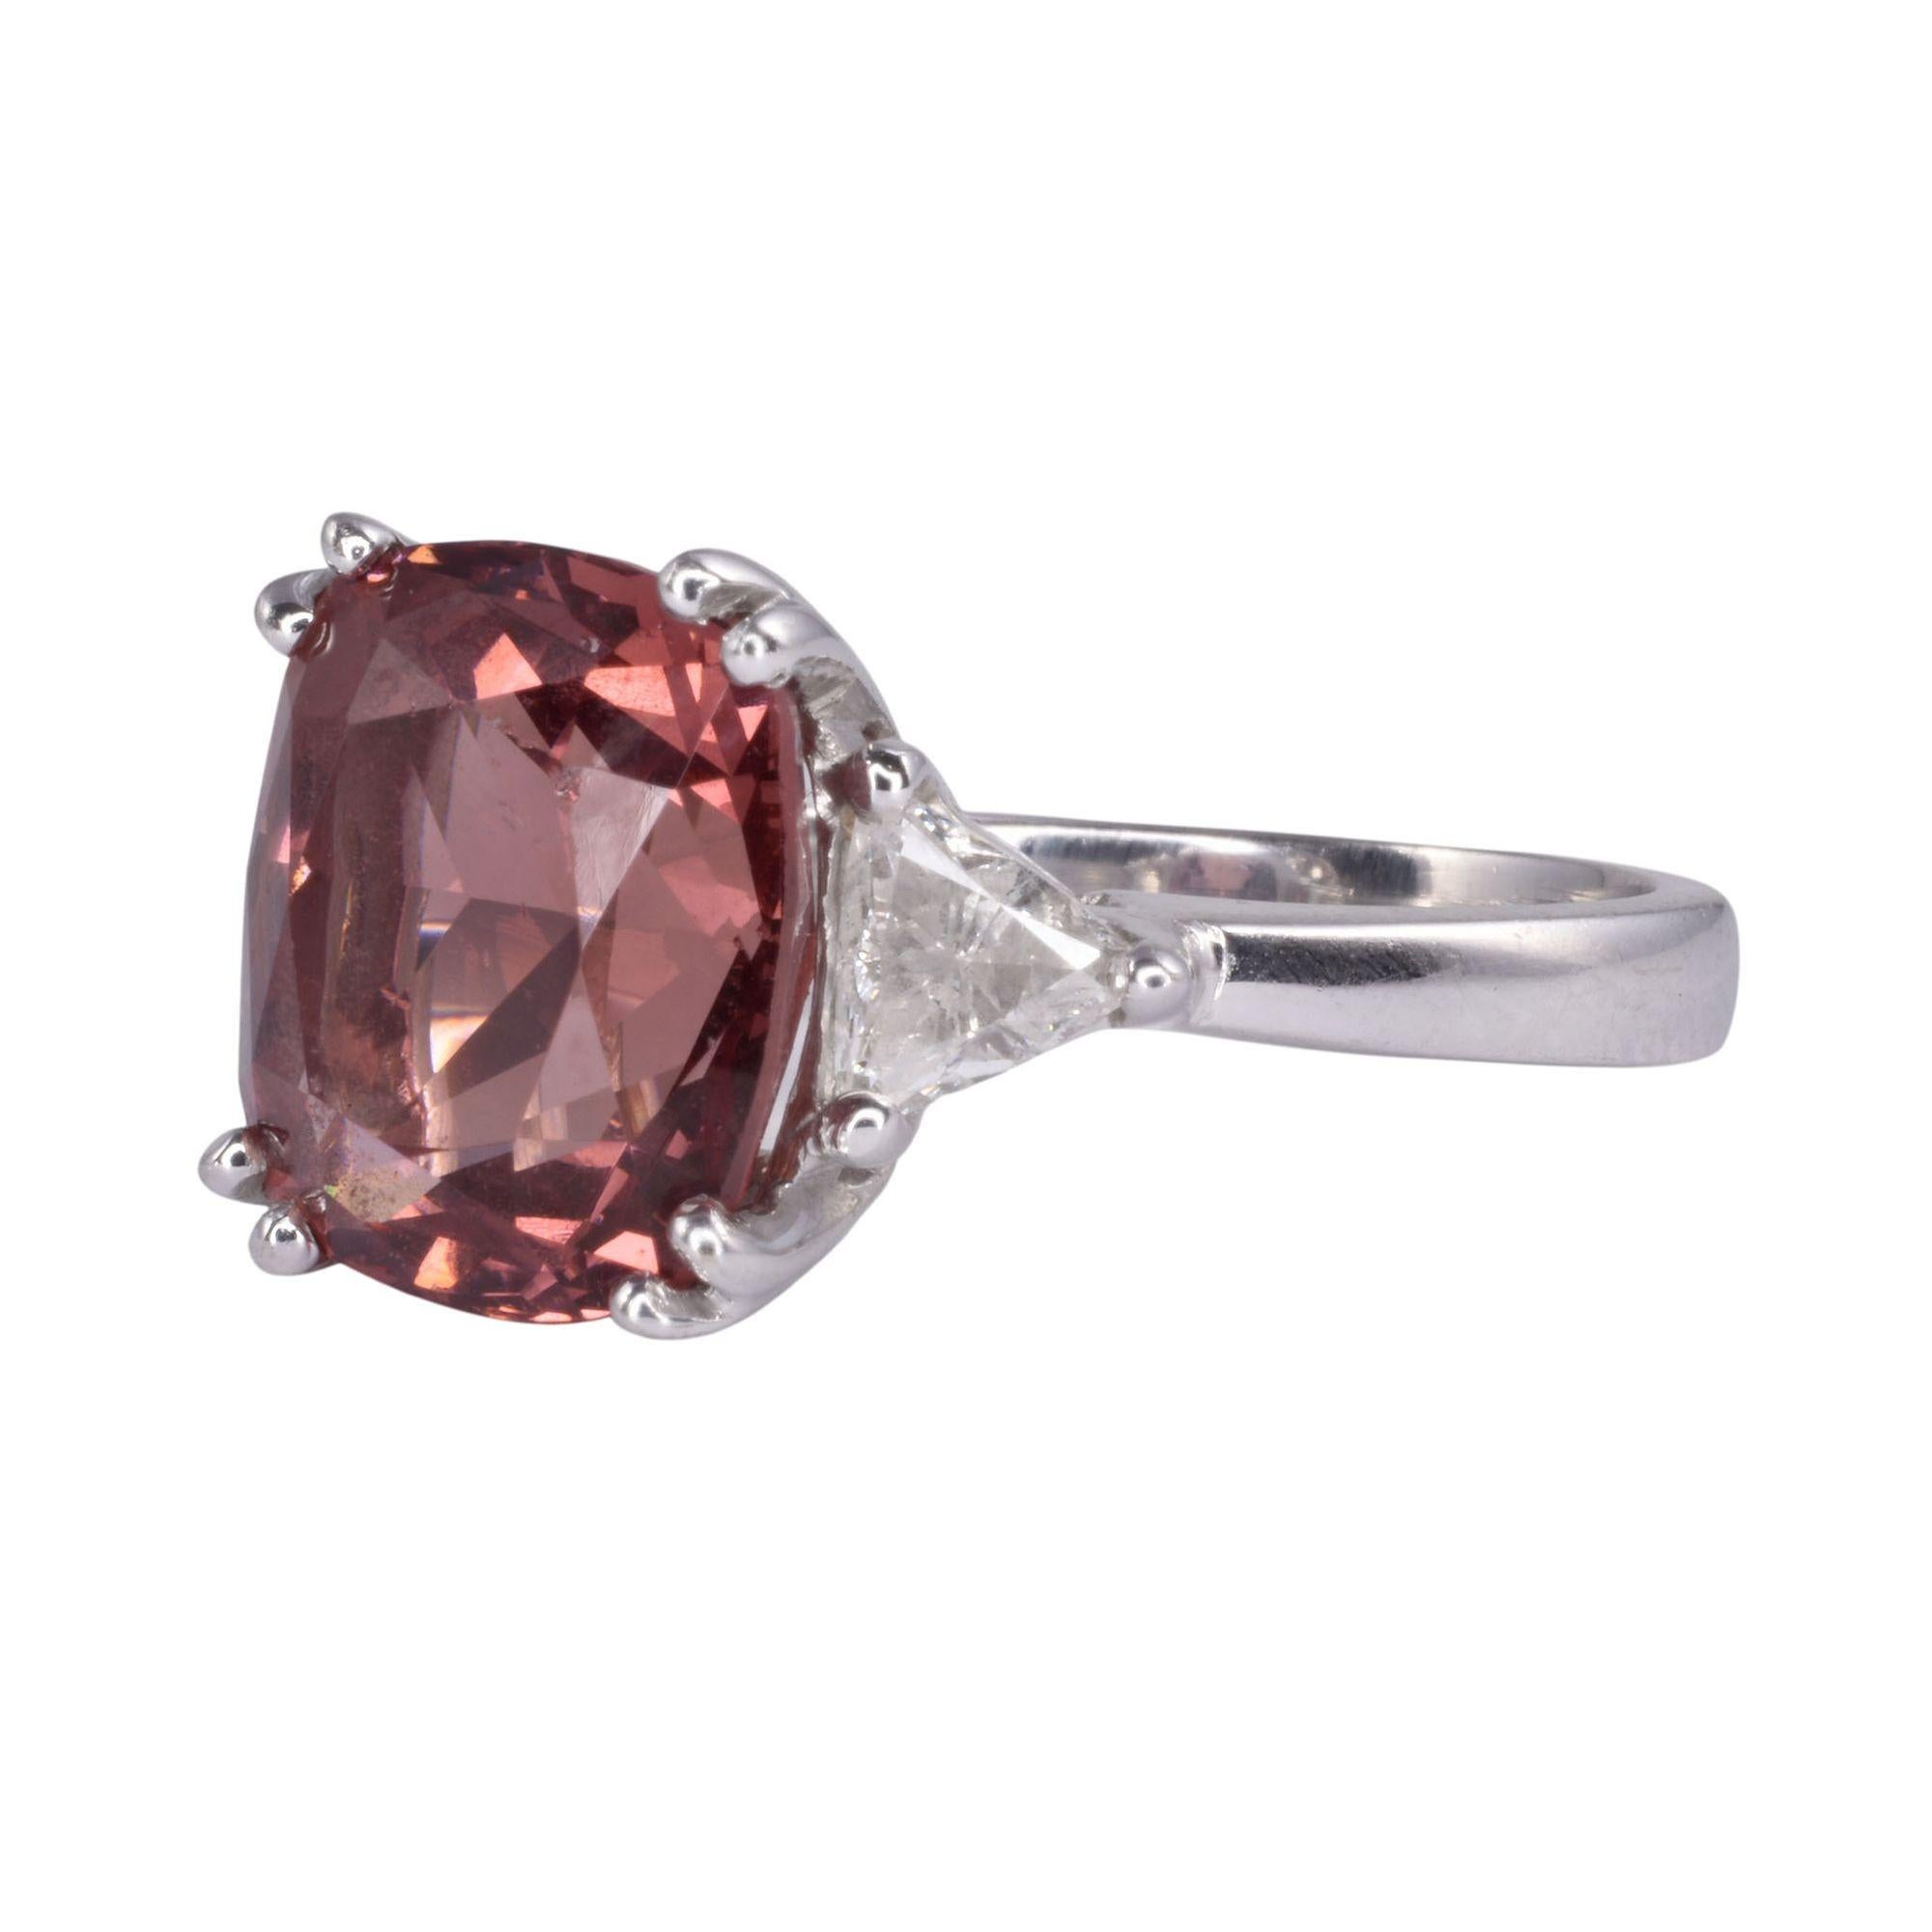 Estate Malaya garnet white gold ring. This 14 karat white gold ring features a Malaya garnet at approximately 8.0 carats. It is accented with two side diamonds at .62 carat total weight with VS clarity & J color. This garnet ring is a size 8. [KIMH